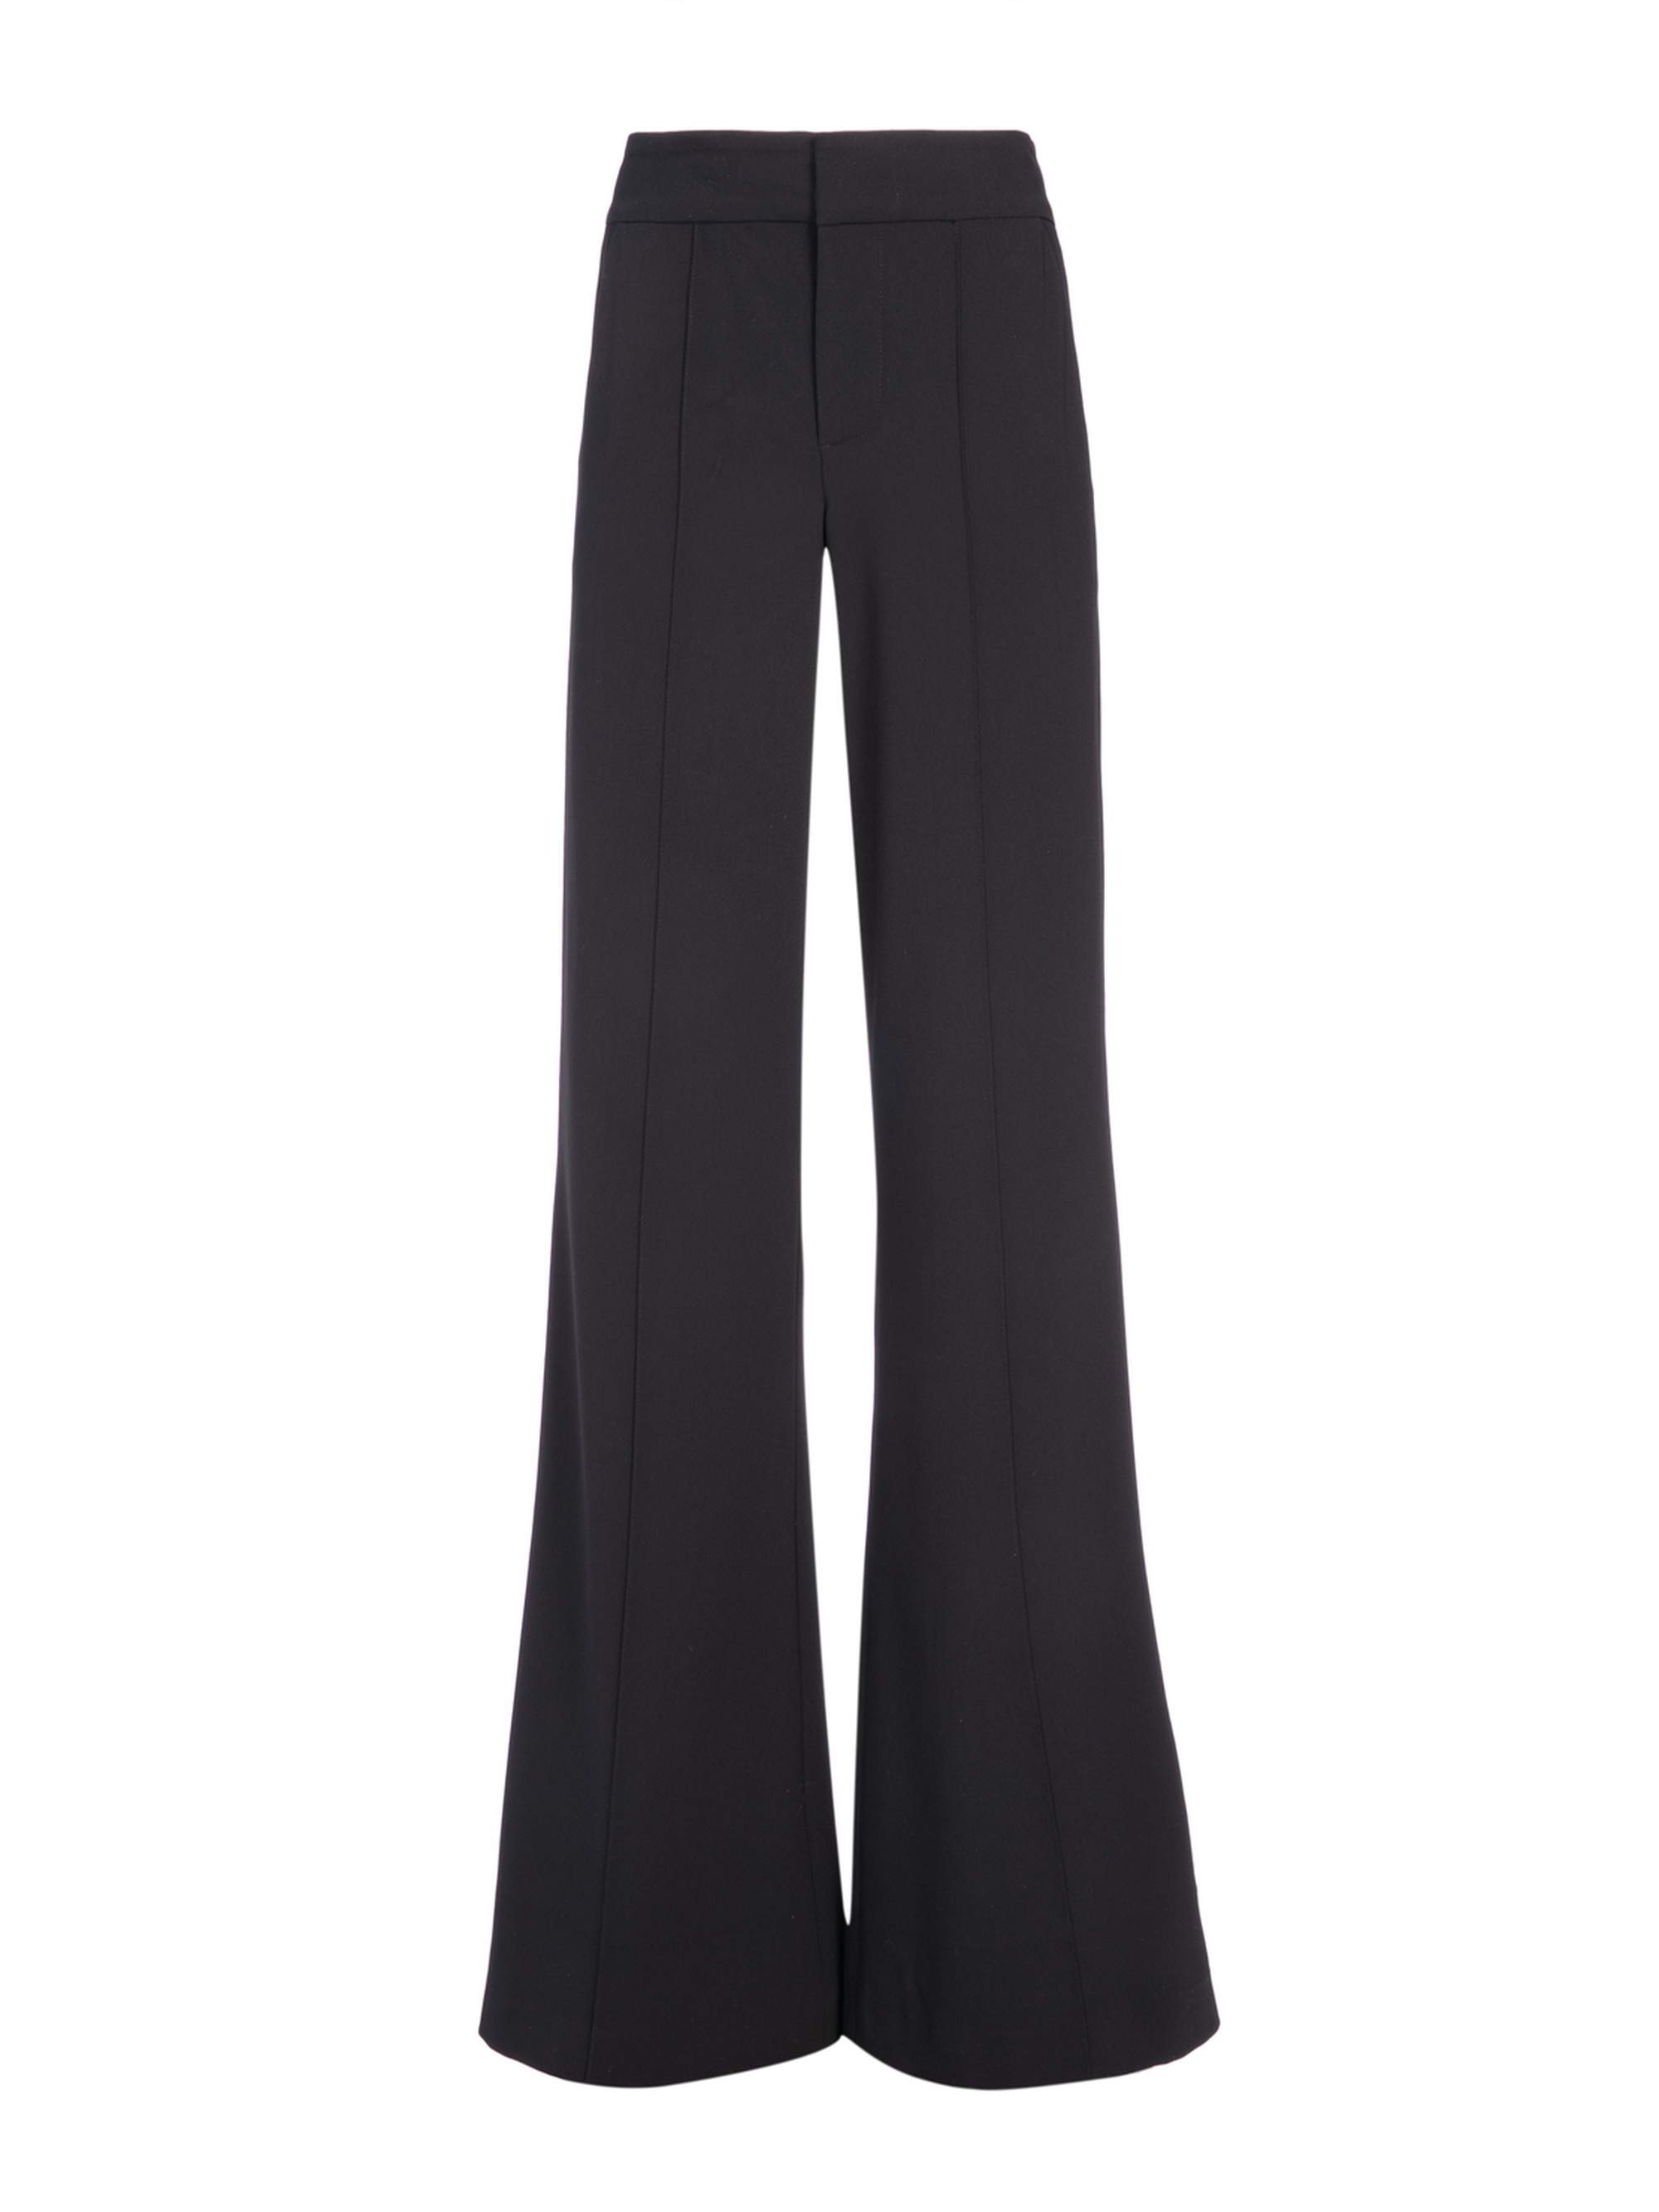 DYLAN HIGH WAISTED WIDE LEG PANT - 1